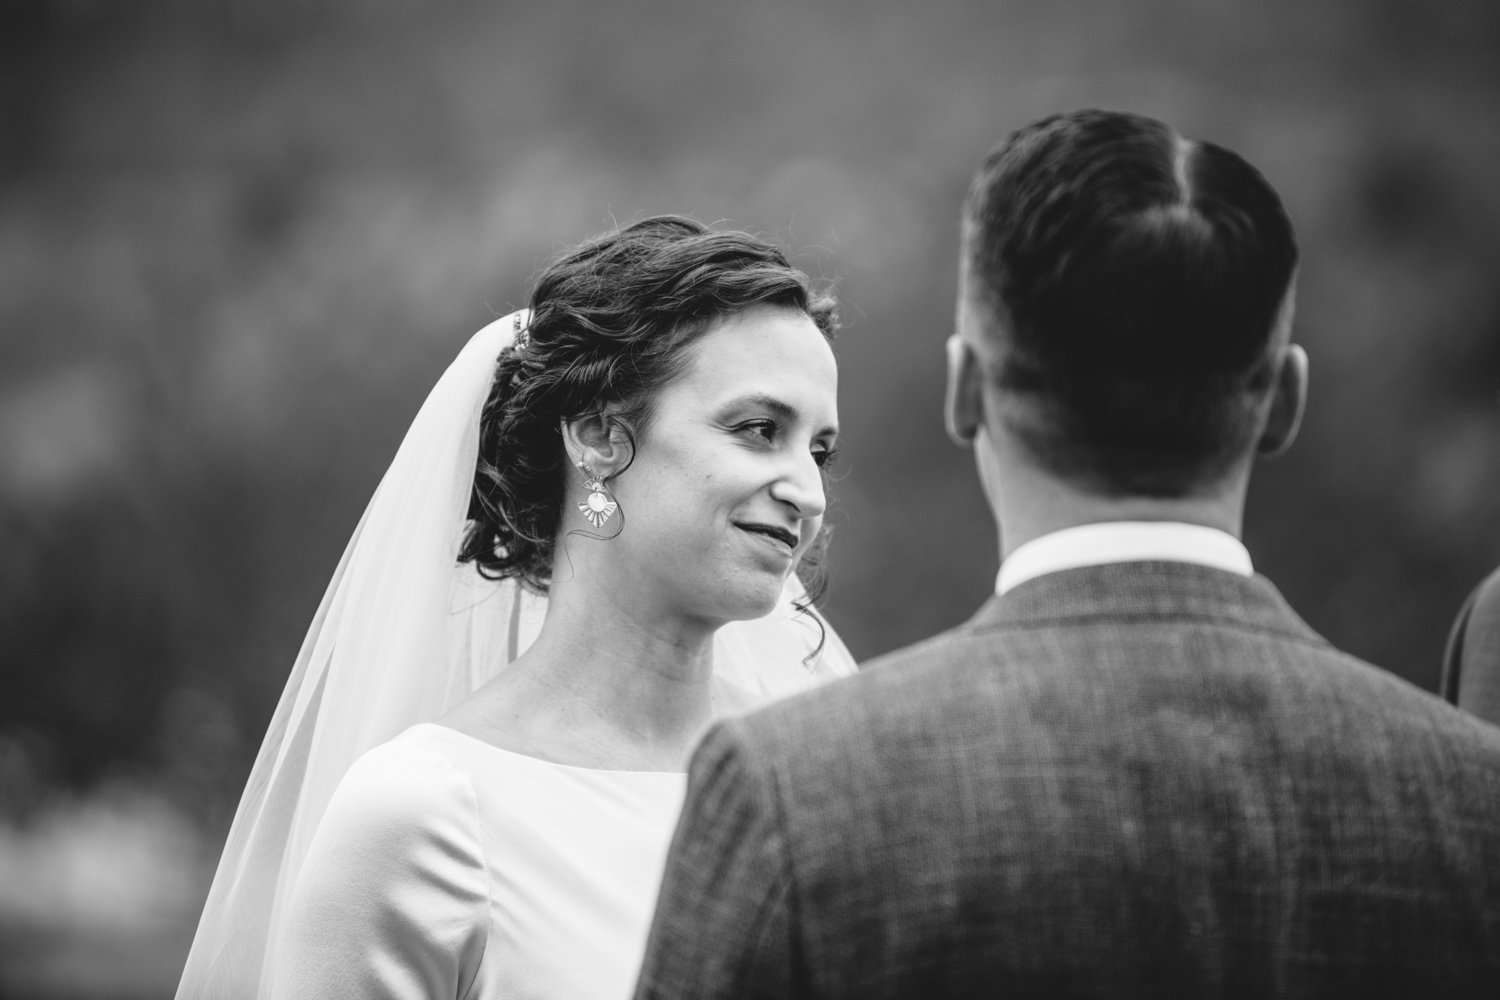 Bride stands in front of the groom and looks off to the side with a smile.

Upstate New York Wedding Photography. Cold Spring NY Wedding Photography. Luxury Local Wedding Photographer. Destination Wedding Photographer.